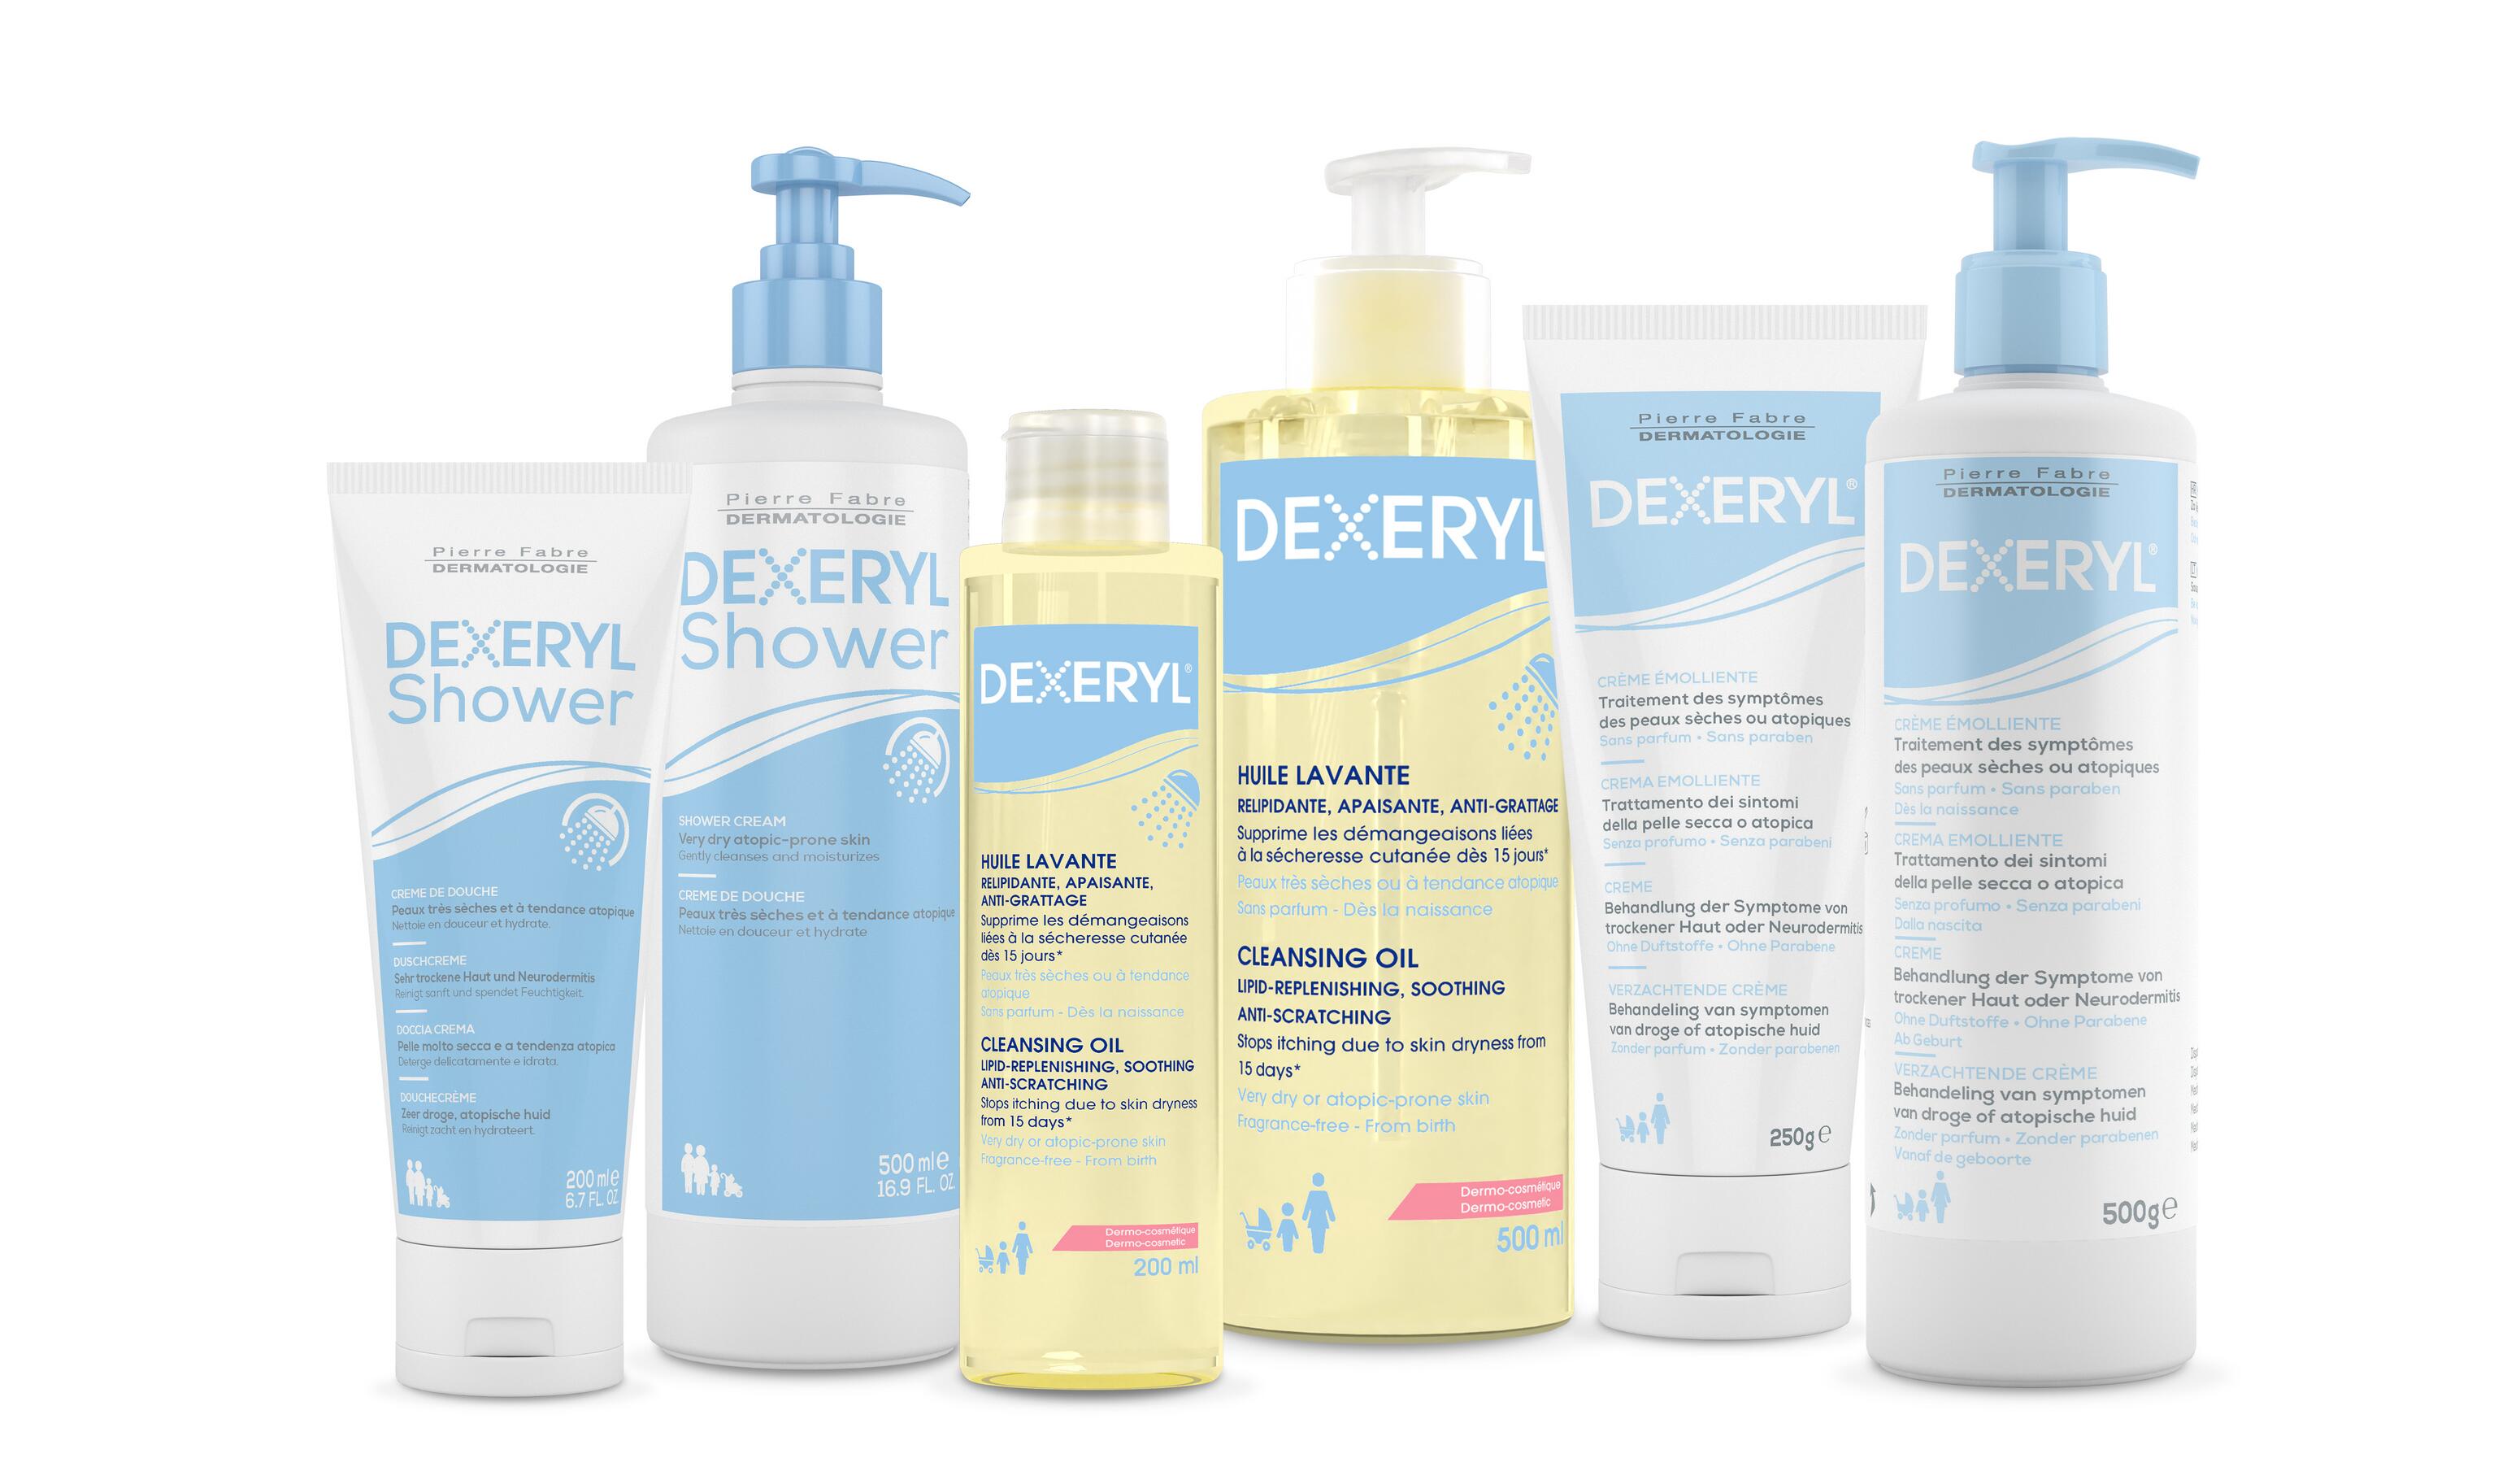 md_dexeryl_shower-cleansing-oil-cream-range-products 2 D1203x834 M366x254